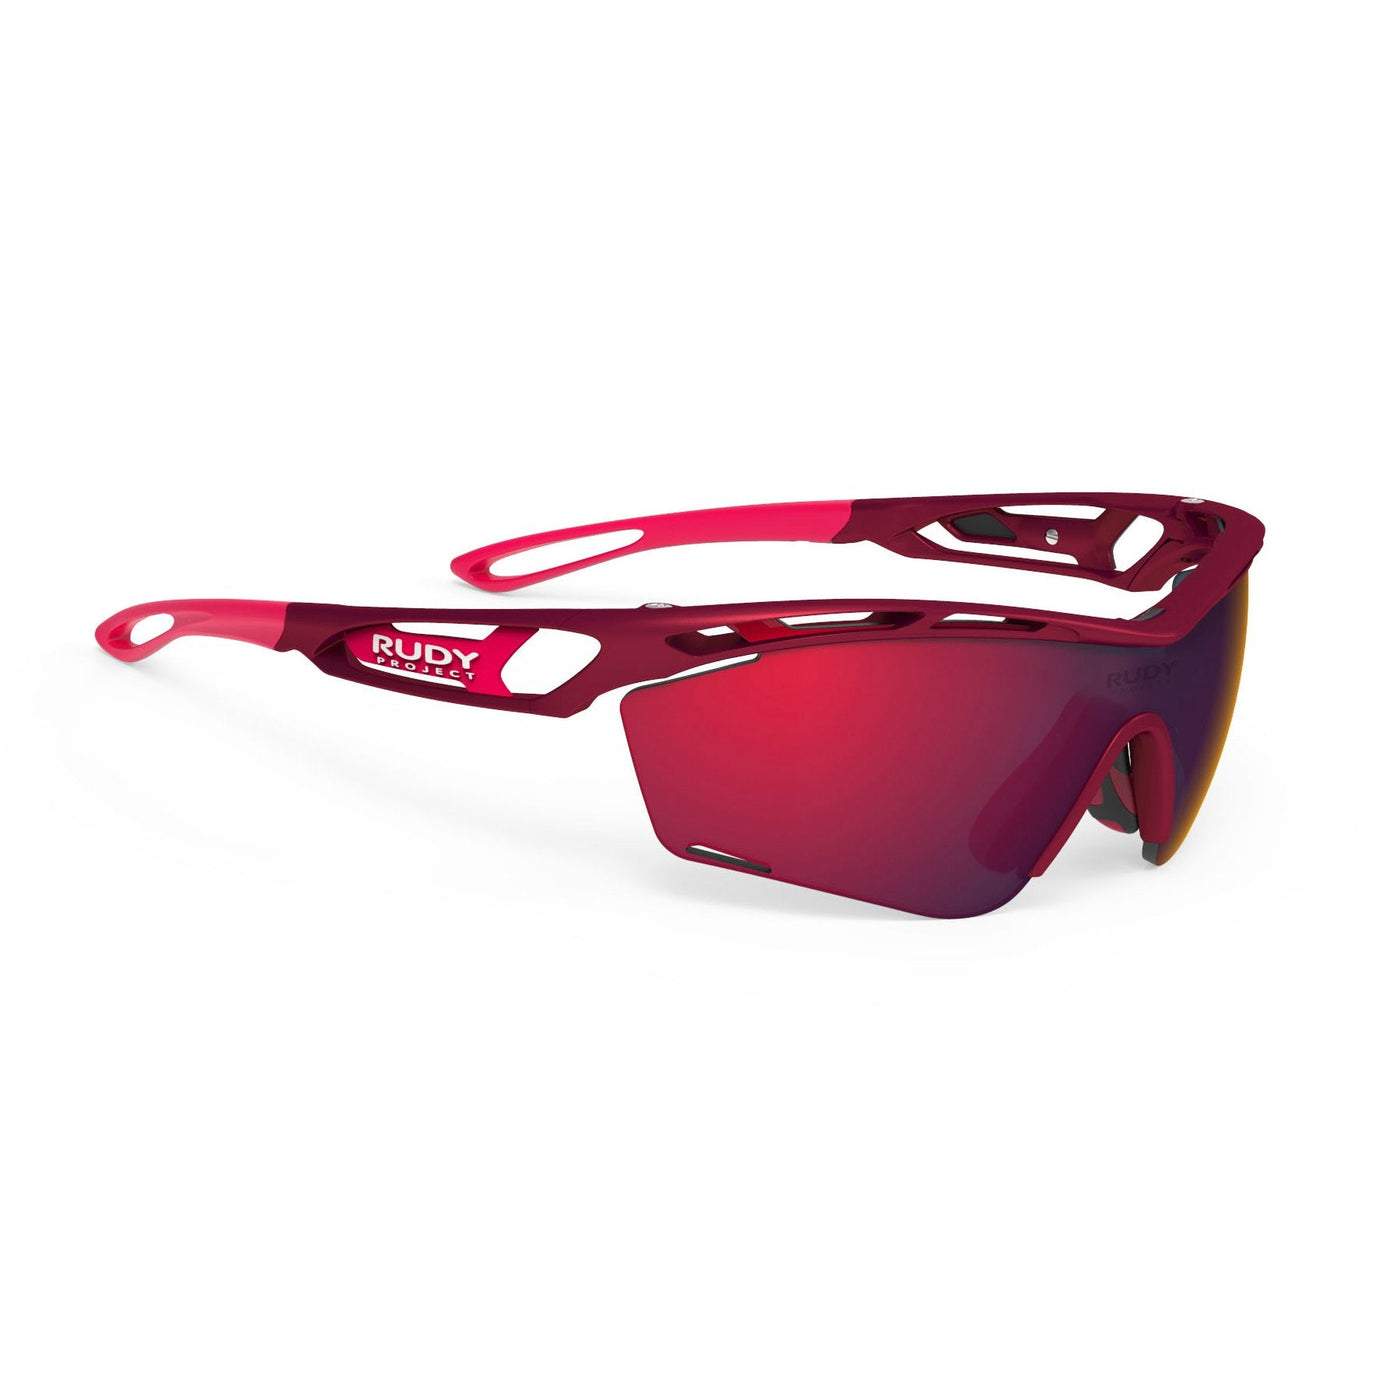 Rudy Project Tralyx running and cycling sport prescription sunglasses.